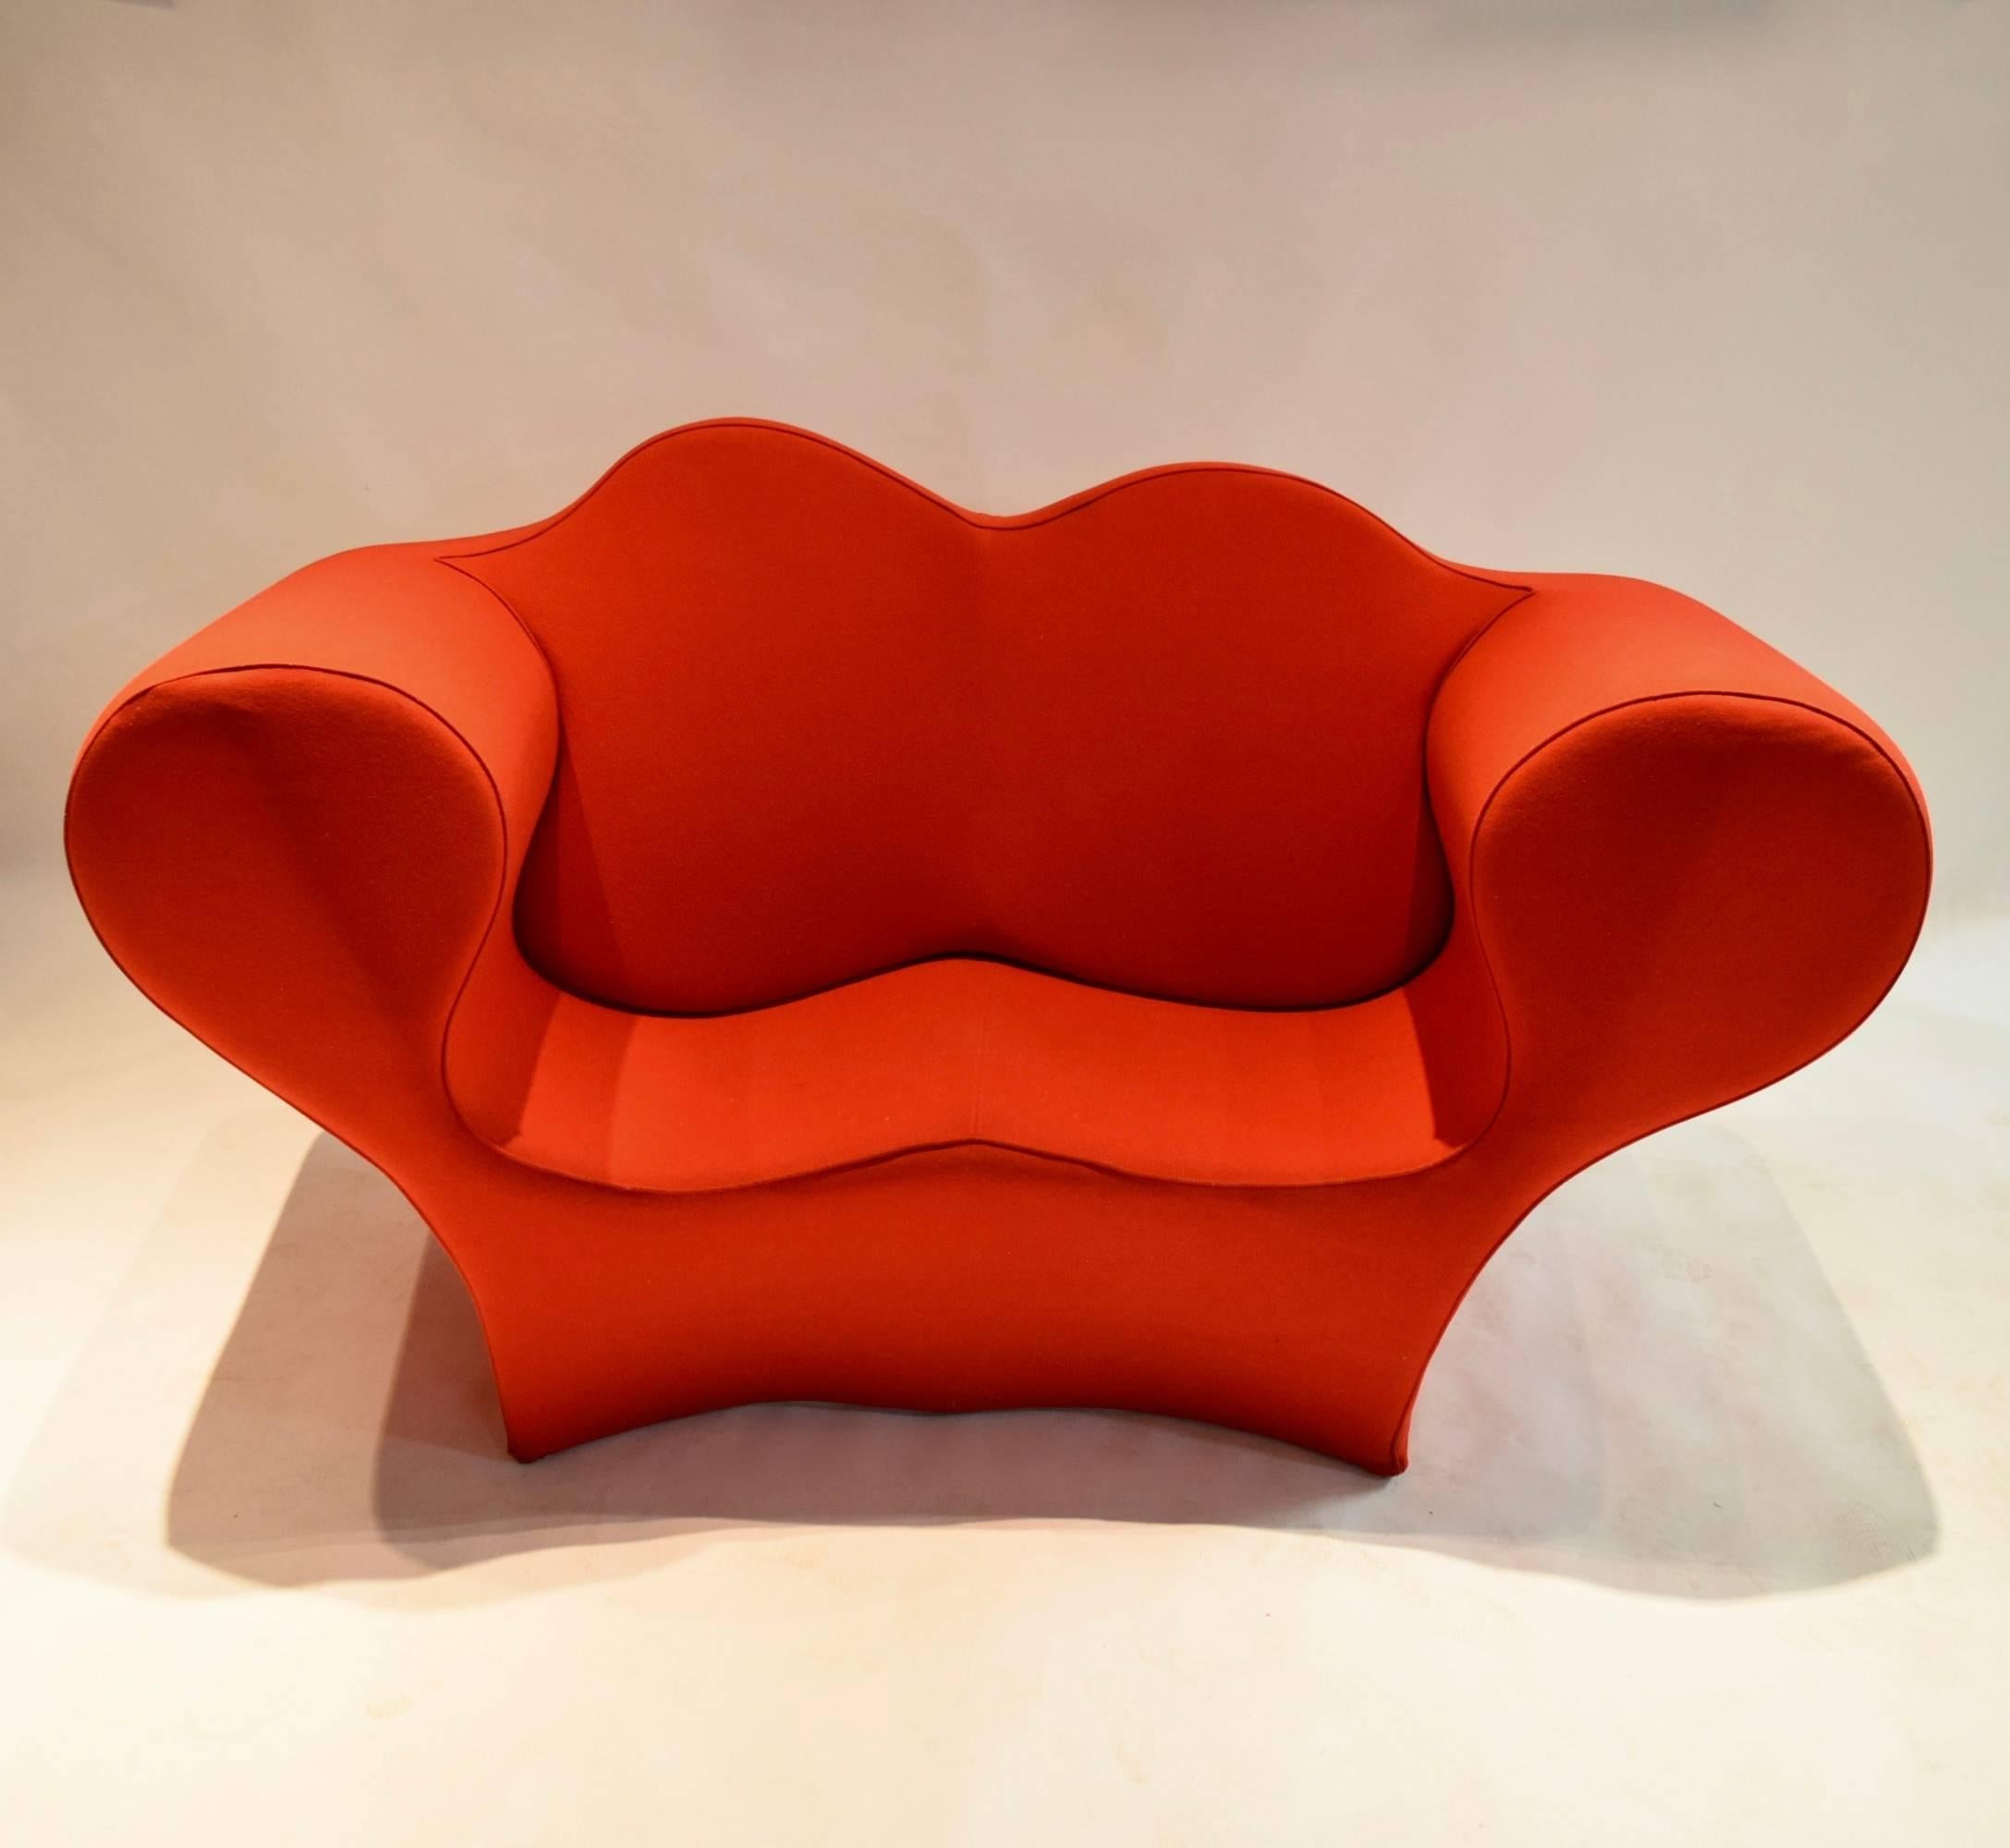 Double Soft Big Easy settee designed by Ron Arad for Moroso in original red wool felt; the sofa was purchased in the early 1990s from its previous, sole owner prior to our acquirement and it is in excellent condition.